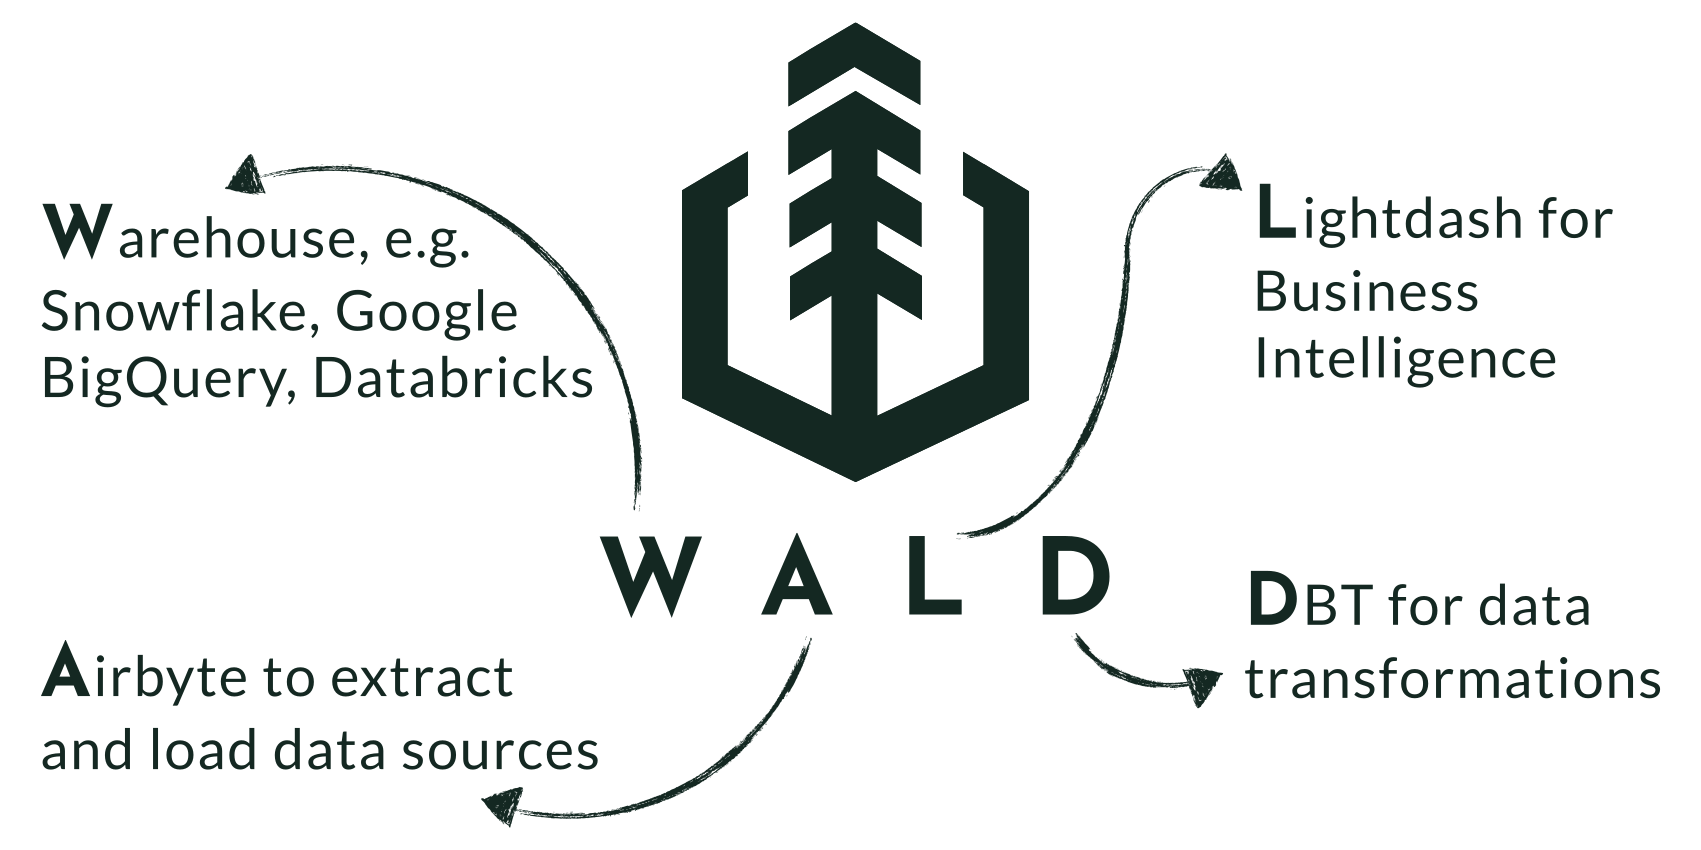 Components of the WALD stack